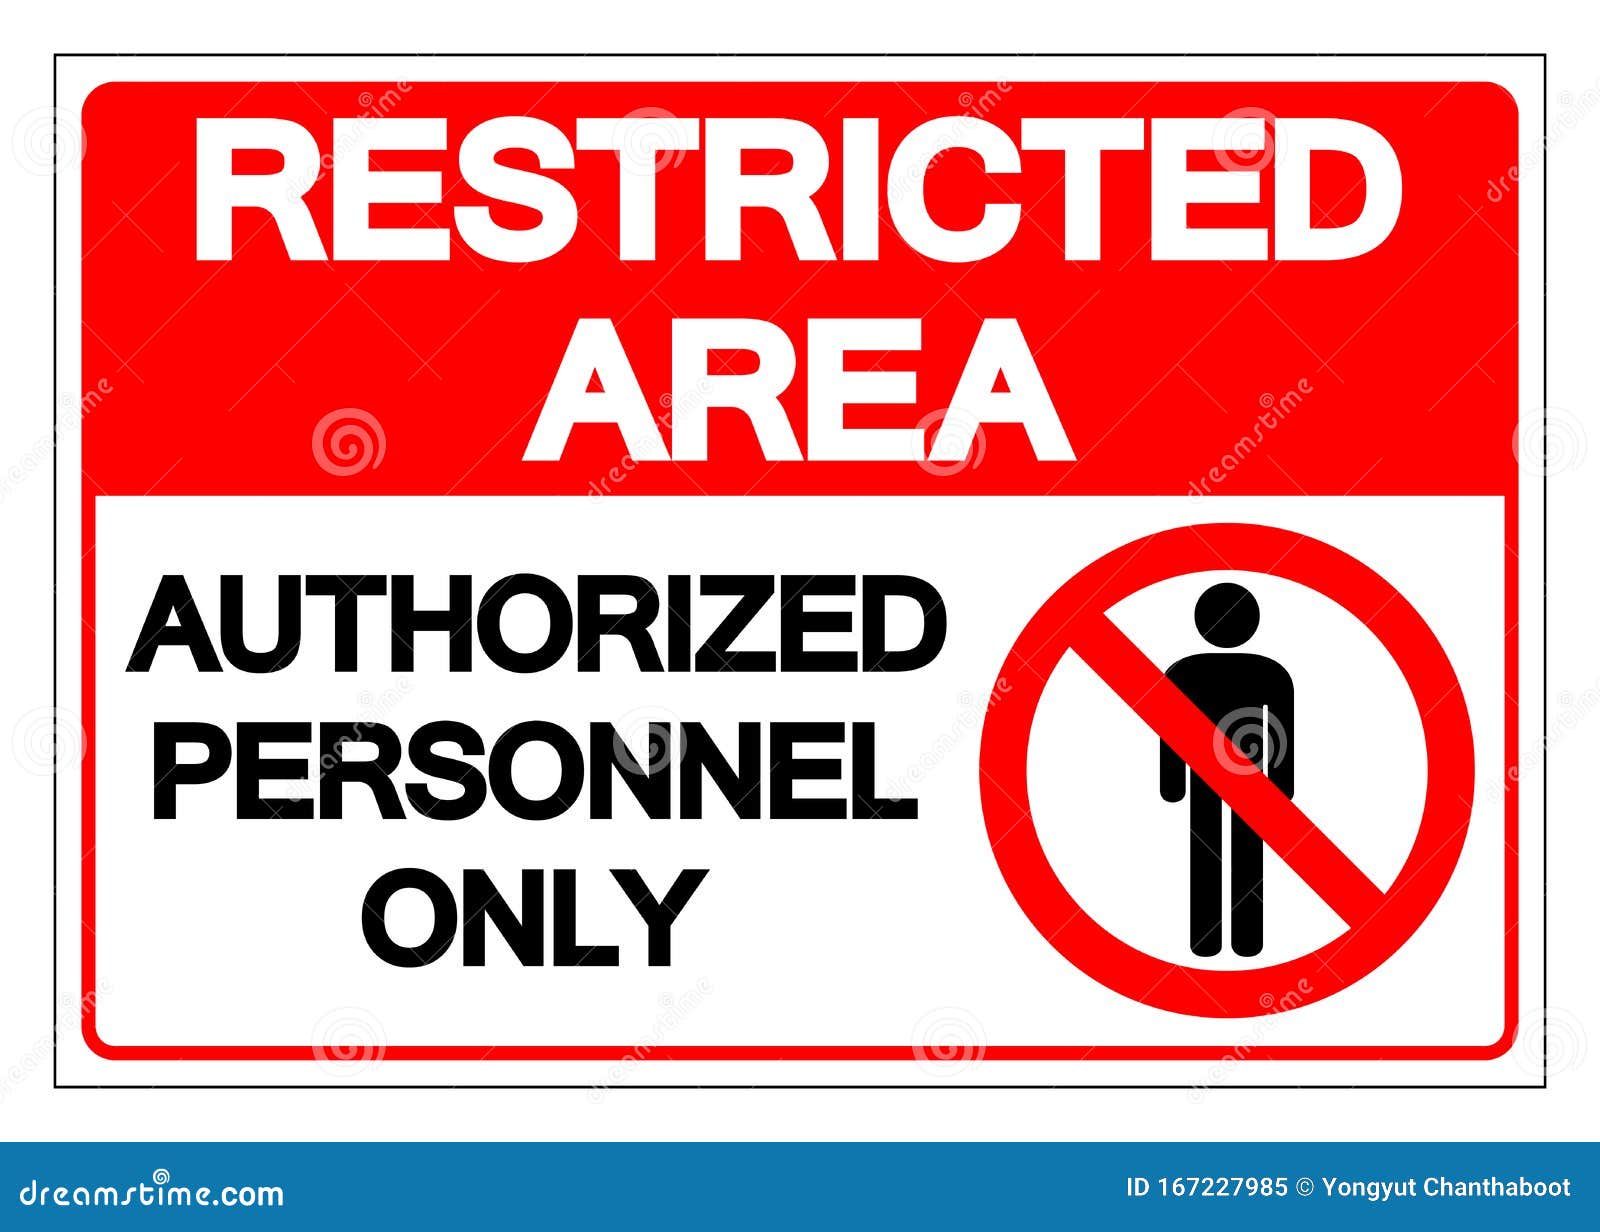 restricted area authorized personnel only  sign,  , isolate on white background label. eps10